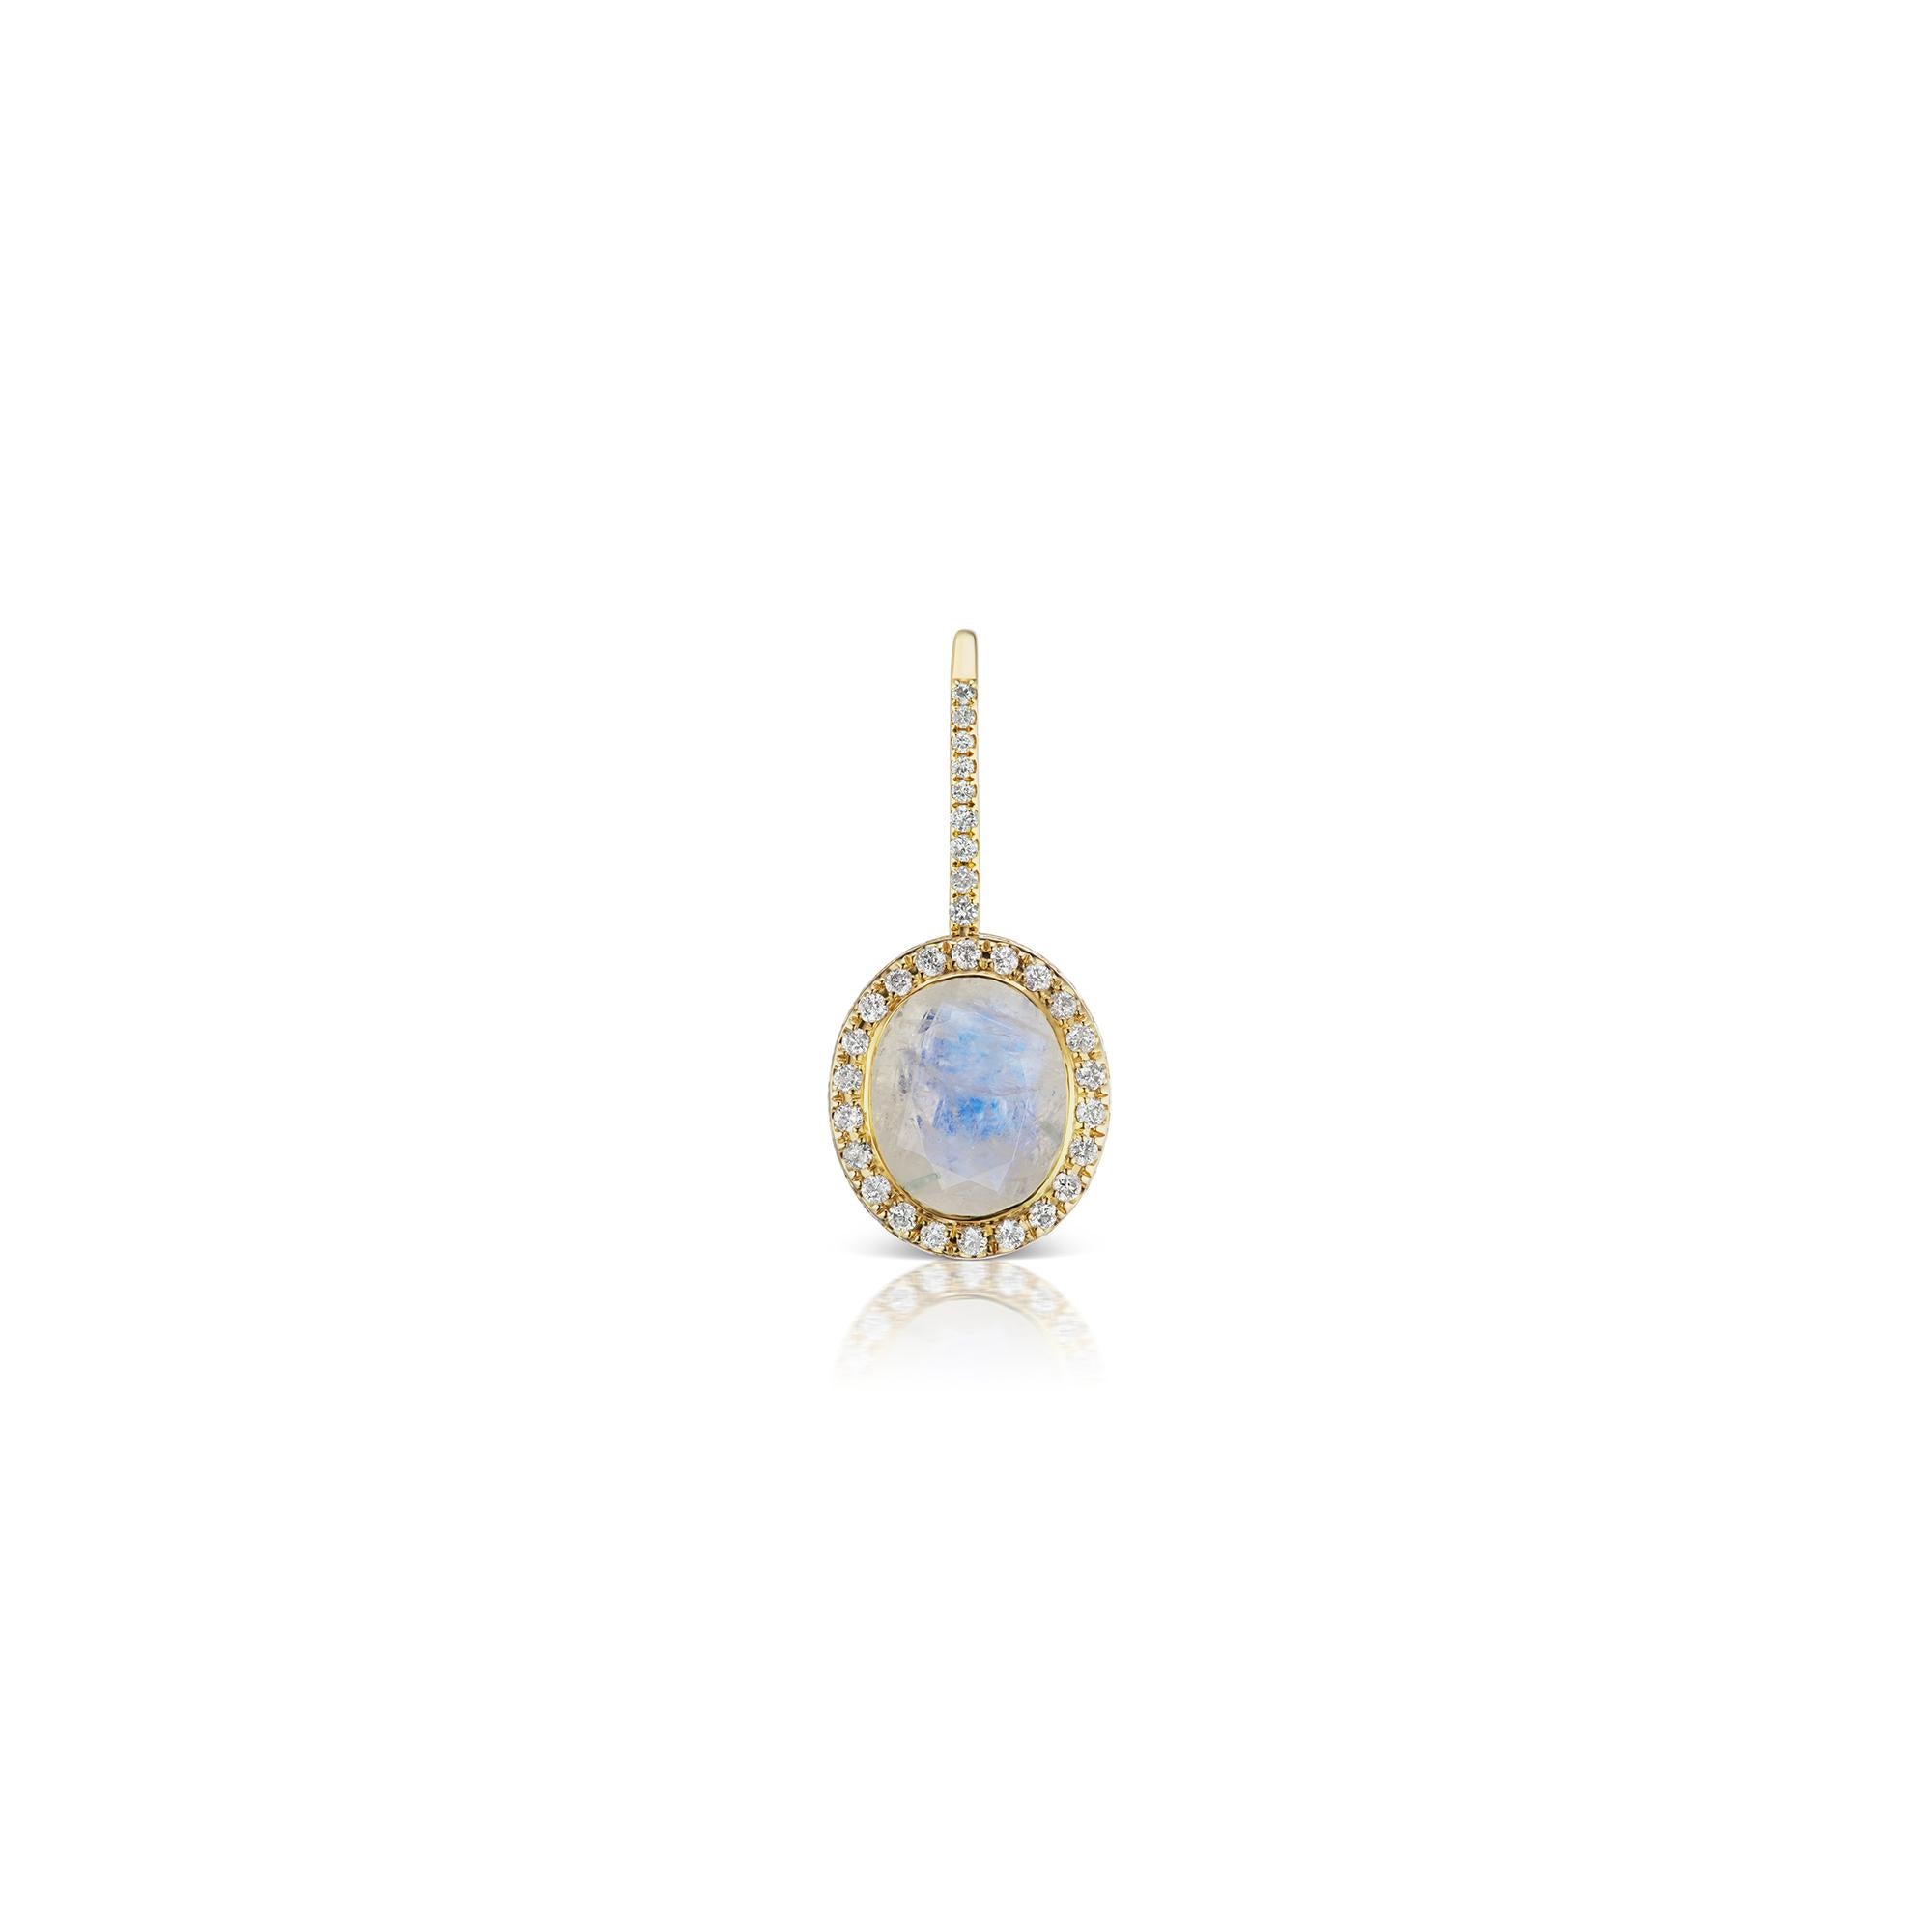 14k Yellow Gold Dangle Earring with Faceted Rainbow Moonstone, (5.72cts) in Diamond Halo and Pave Diamond Earwire (Dia.0.59cts).

This elegant earring style is a show stopper.  Our Rainbow Moonstone is chosen to showcase the beautiful blue flash